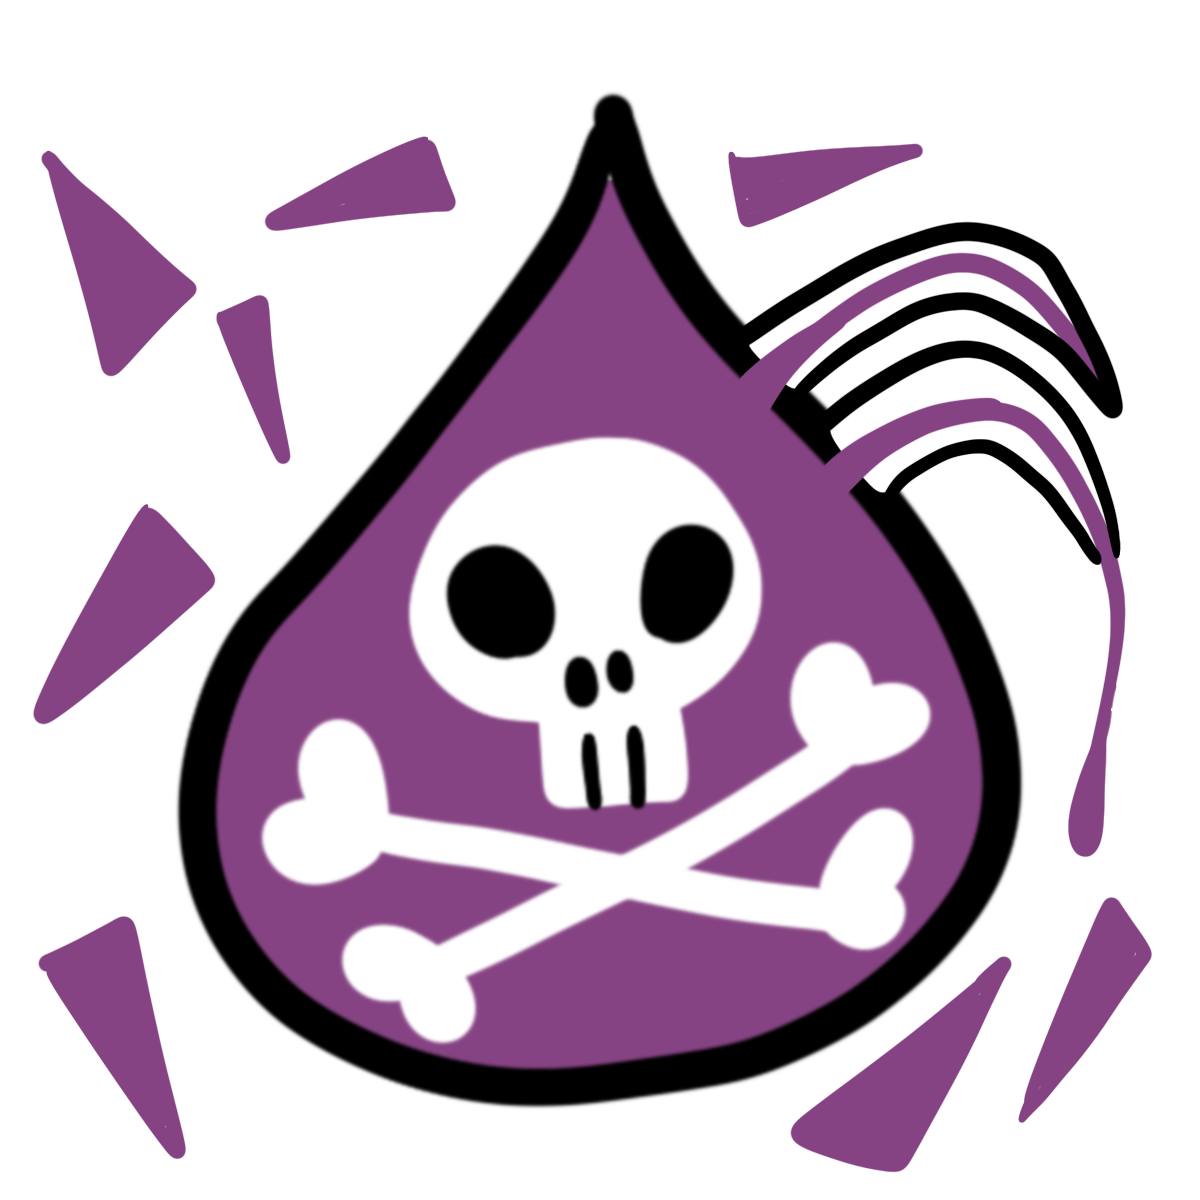 a purple droplet with white skull and crossbones has two fangs and is surrounded with purple thin triangles floating.